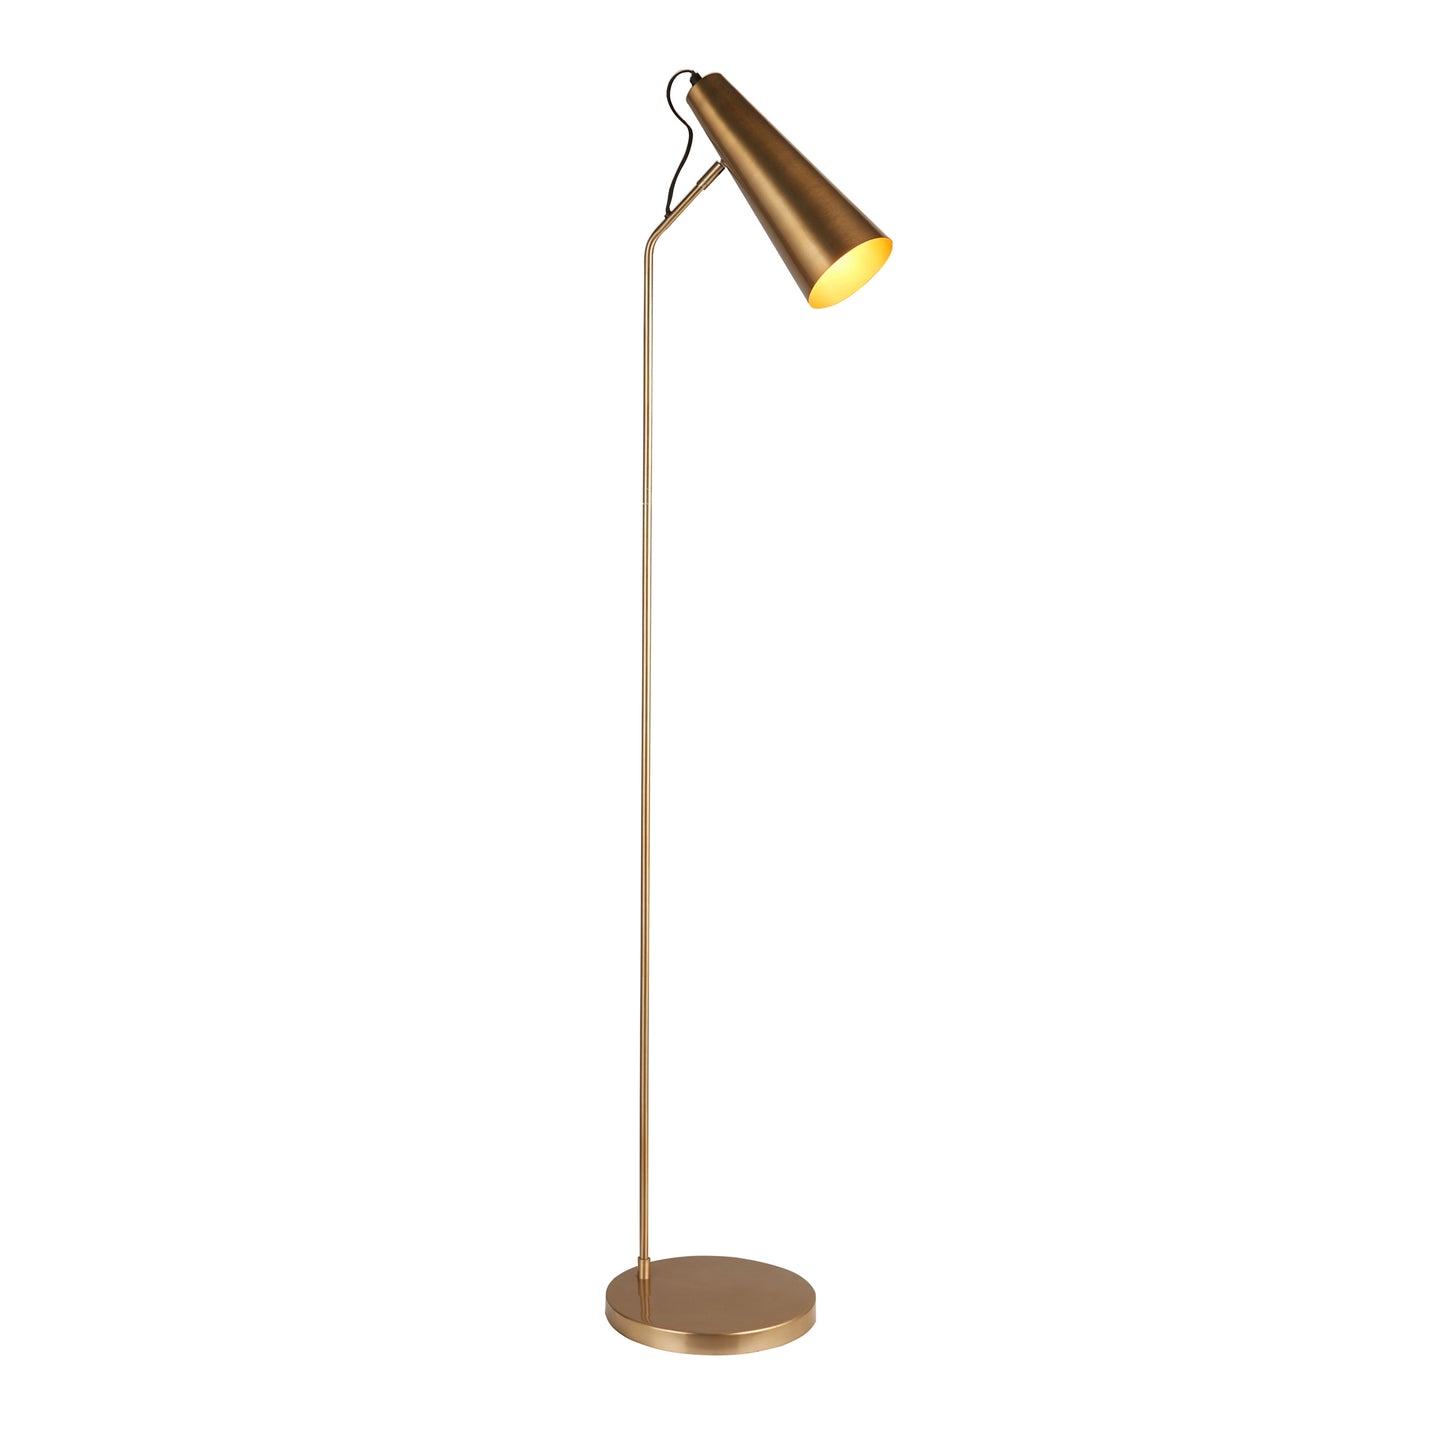 A Cross Floor Lamp for interior decor by Kikiathome.co.uk on a white background.